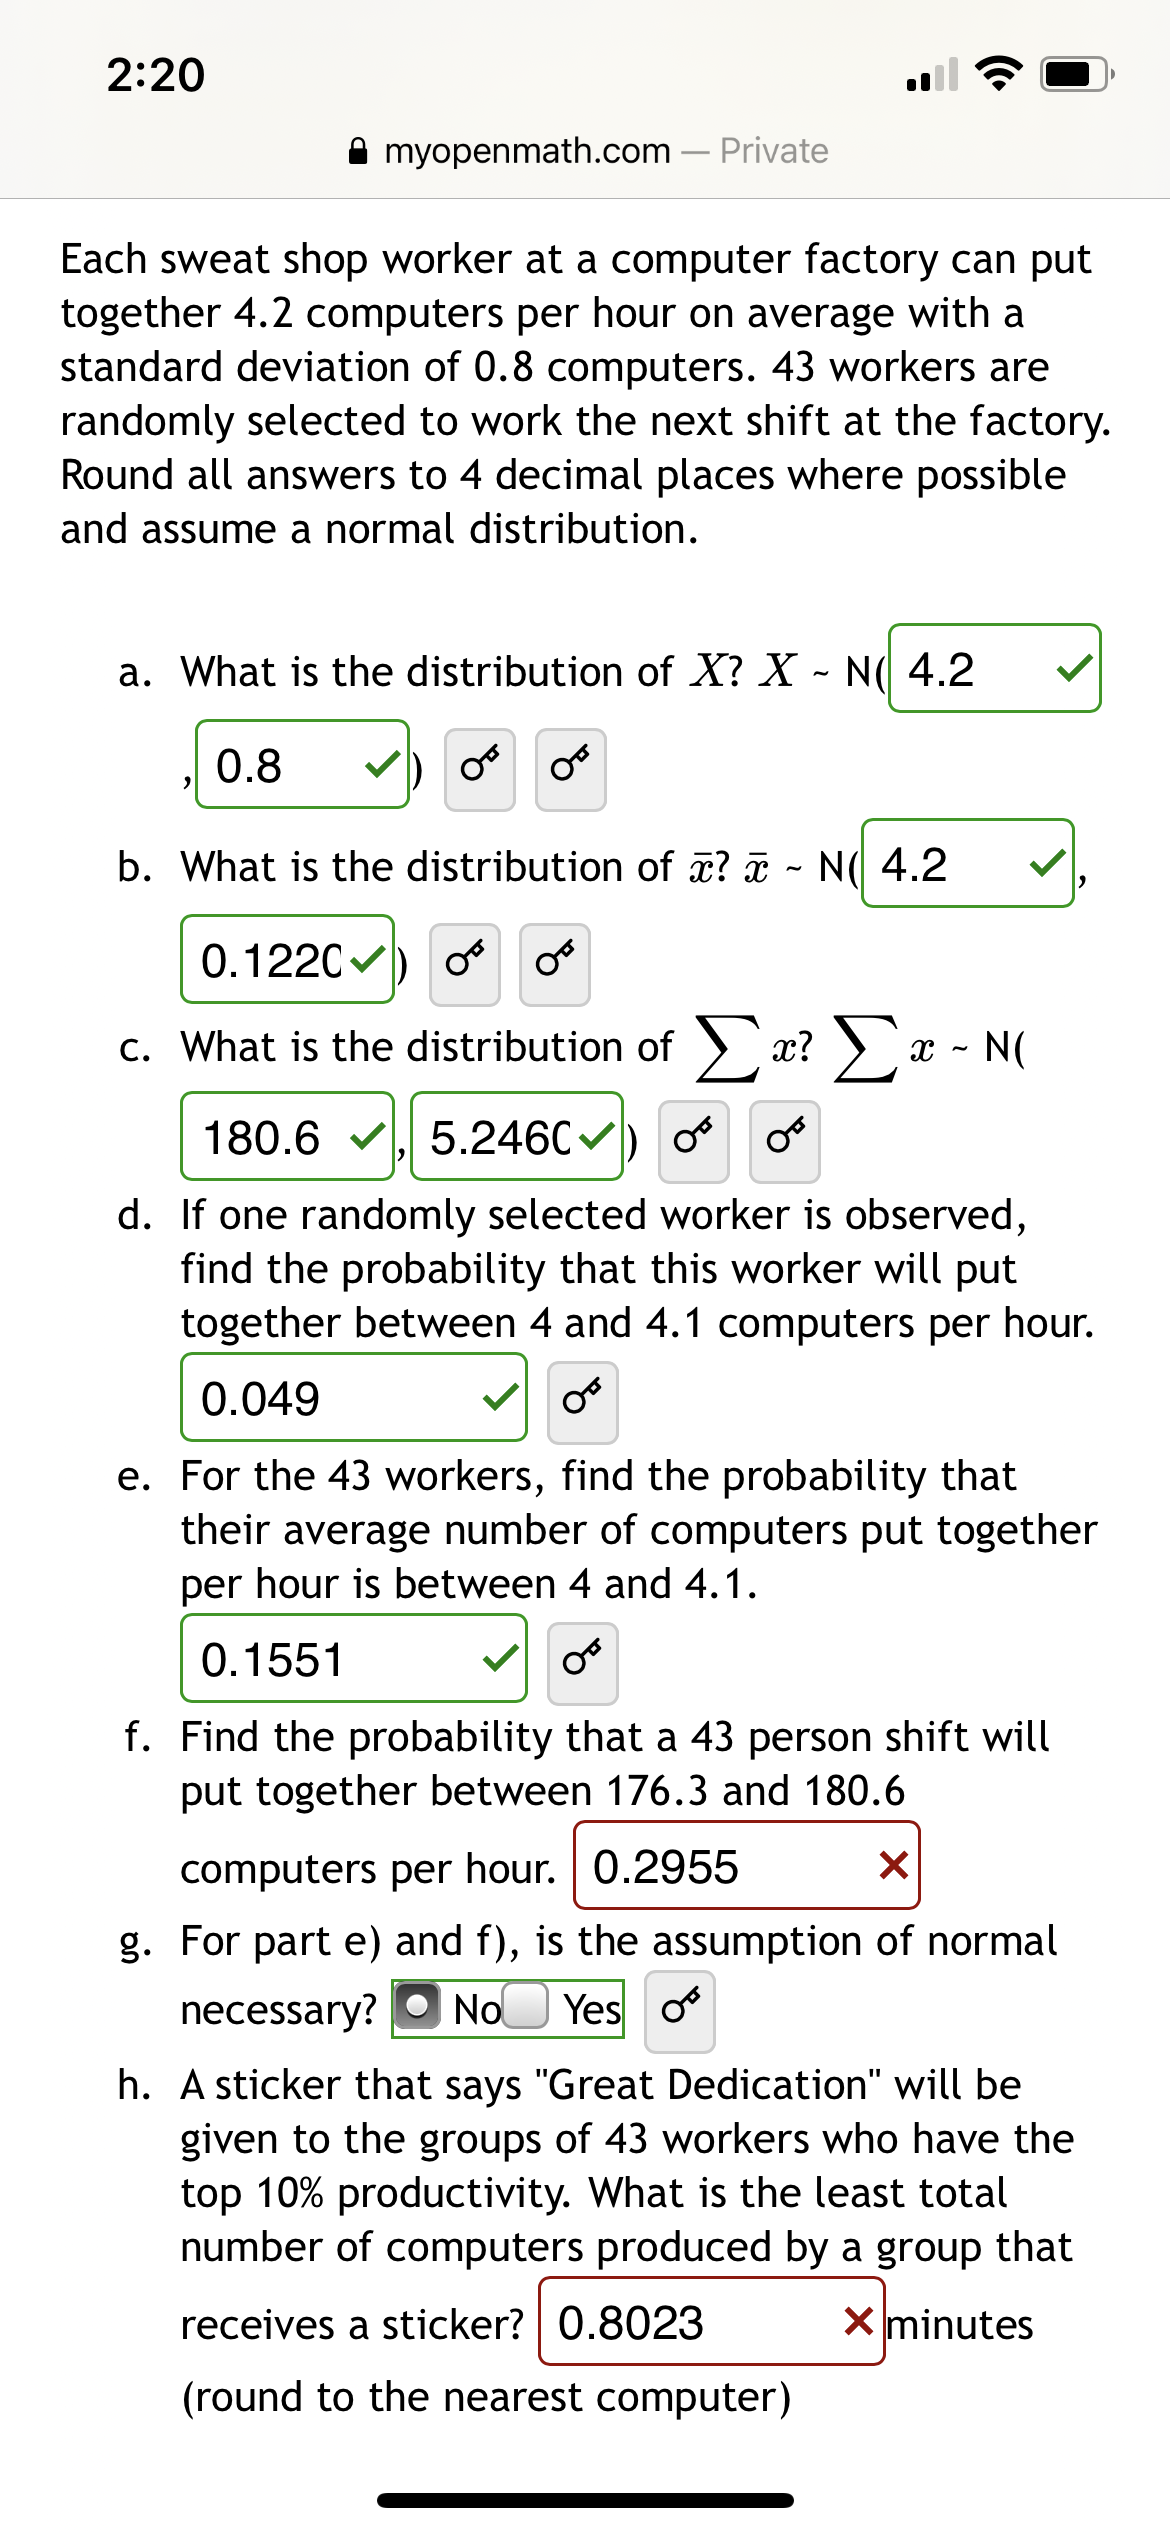 2:20
myopenmath.com – Private
Each sweat shop worker at a computer factory can put
together 4.2 computers per hour on average with a
standard deviation of 0.8 computers. 43 workers are
randomly selected to work the next shift at the factory.
Round all answers to 4 decimal places where possible
and assume a normal distribution.
a. What is the distribution of X? X - N( 4.2
0.8
V) o
b. What is the distribution of x? a - N( 4.2
0.1220
С.
c. What is the distribution of > x? ) x - N(
180.6 v. 5.2460
d. If one randomly selected worker is observed,
find the probability that this worker will put
together between 4 and 4.1 computers per hour.
0.049
e. For the 43 workers, find the probability that
their average number of computers put together
per hour is between 4 and 4.1.
0.1551
f. Find the probability that a 43 person shift will
put together between 176.3 and 180.6
computers per hour. 0.2955
g. For part e) and f), is the assumption of normal
necessary?
No
Yes o
h. A sticker that says "Great Dedication" will be
given to the groups of 43 workers who have the
top 10% productivity. What is the least total
number of computers produced by a group that
receives a sticker? 0.8023
X minutes
(round to the nearest computer)
